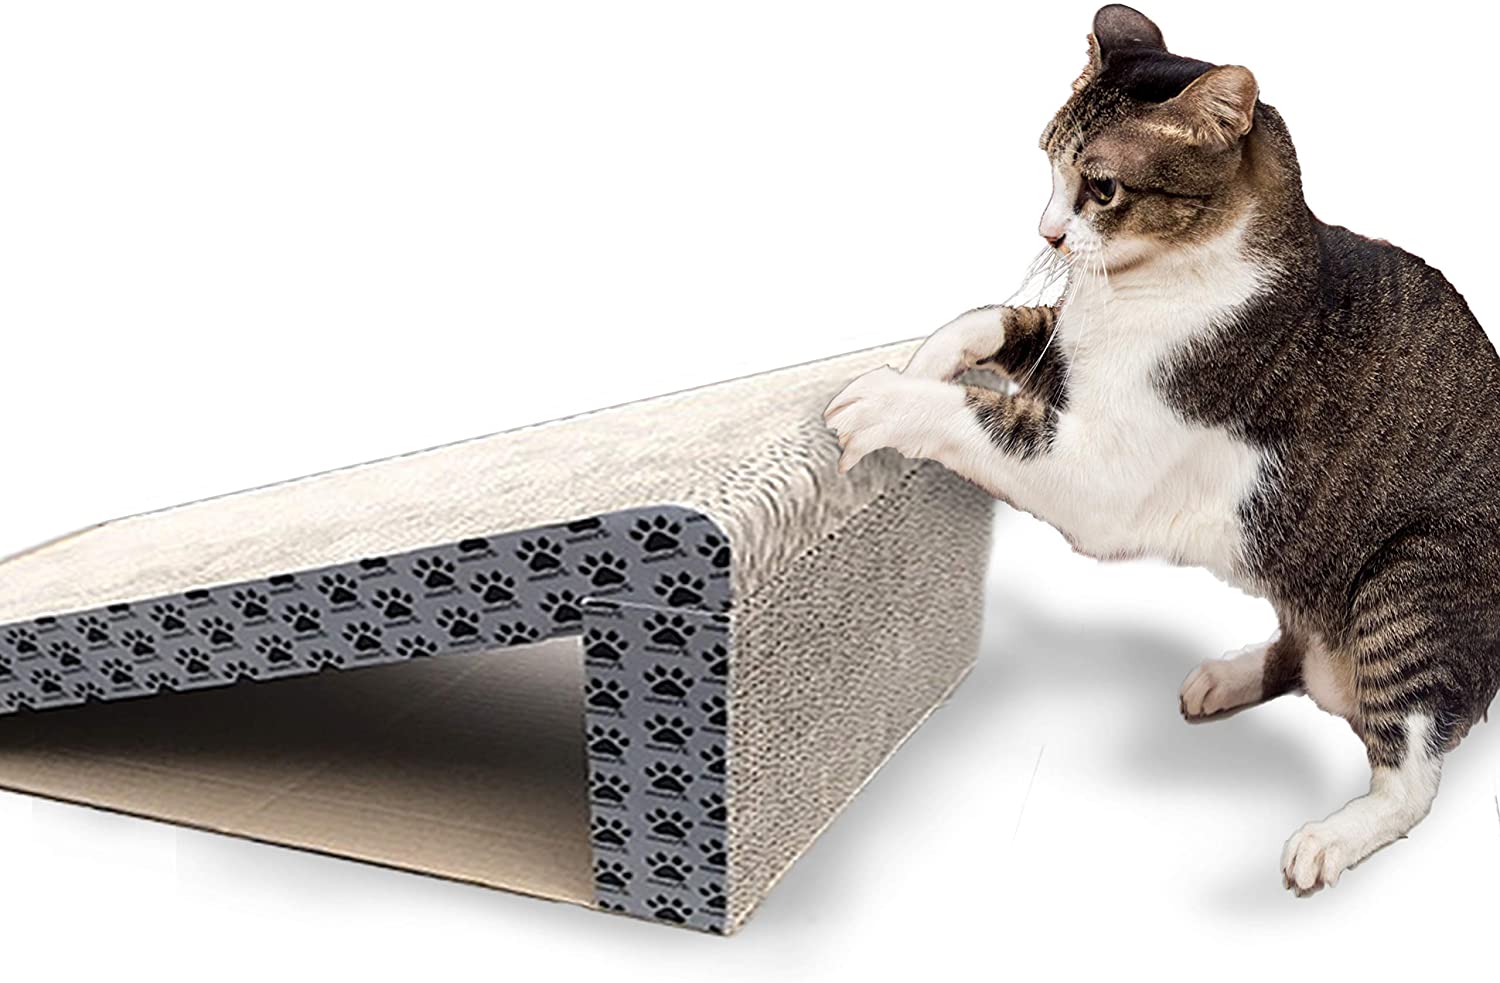 iPrimio Cat Scratcher Ramp – Foldable for Travel and Easy Storage $9.95 (REG $19.95)